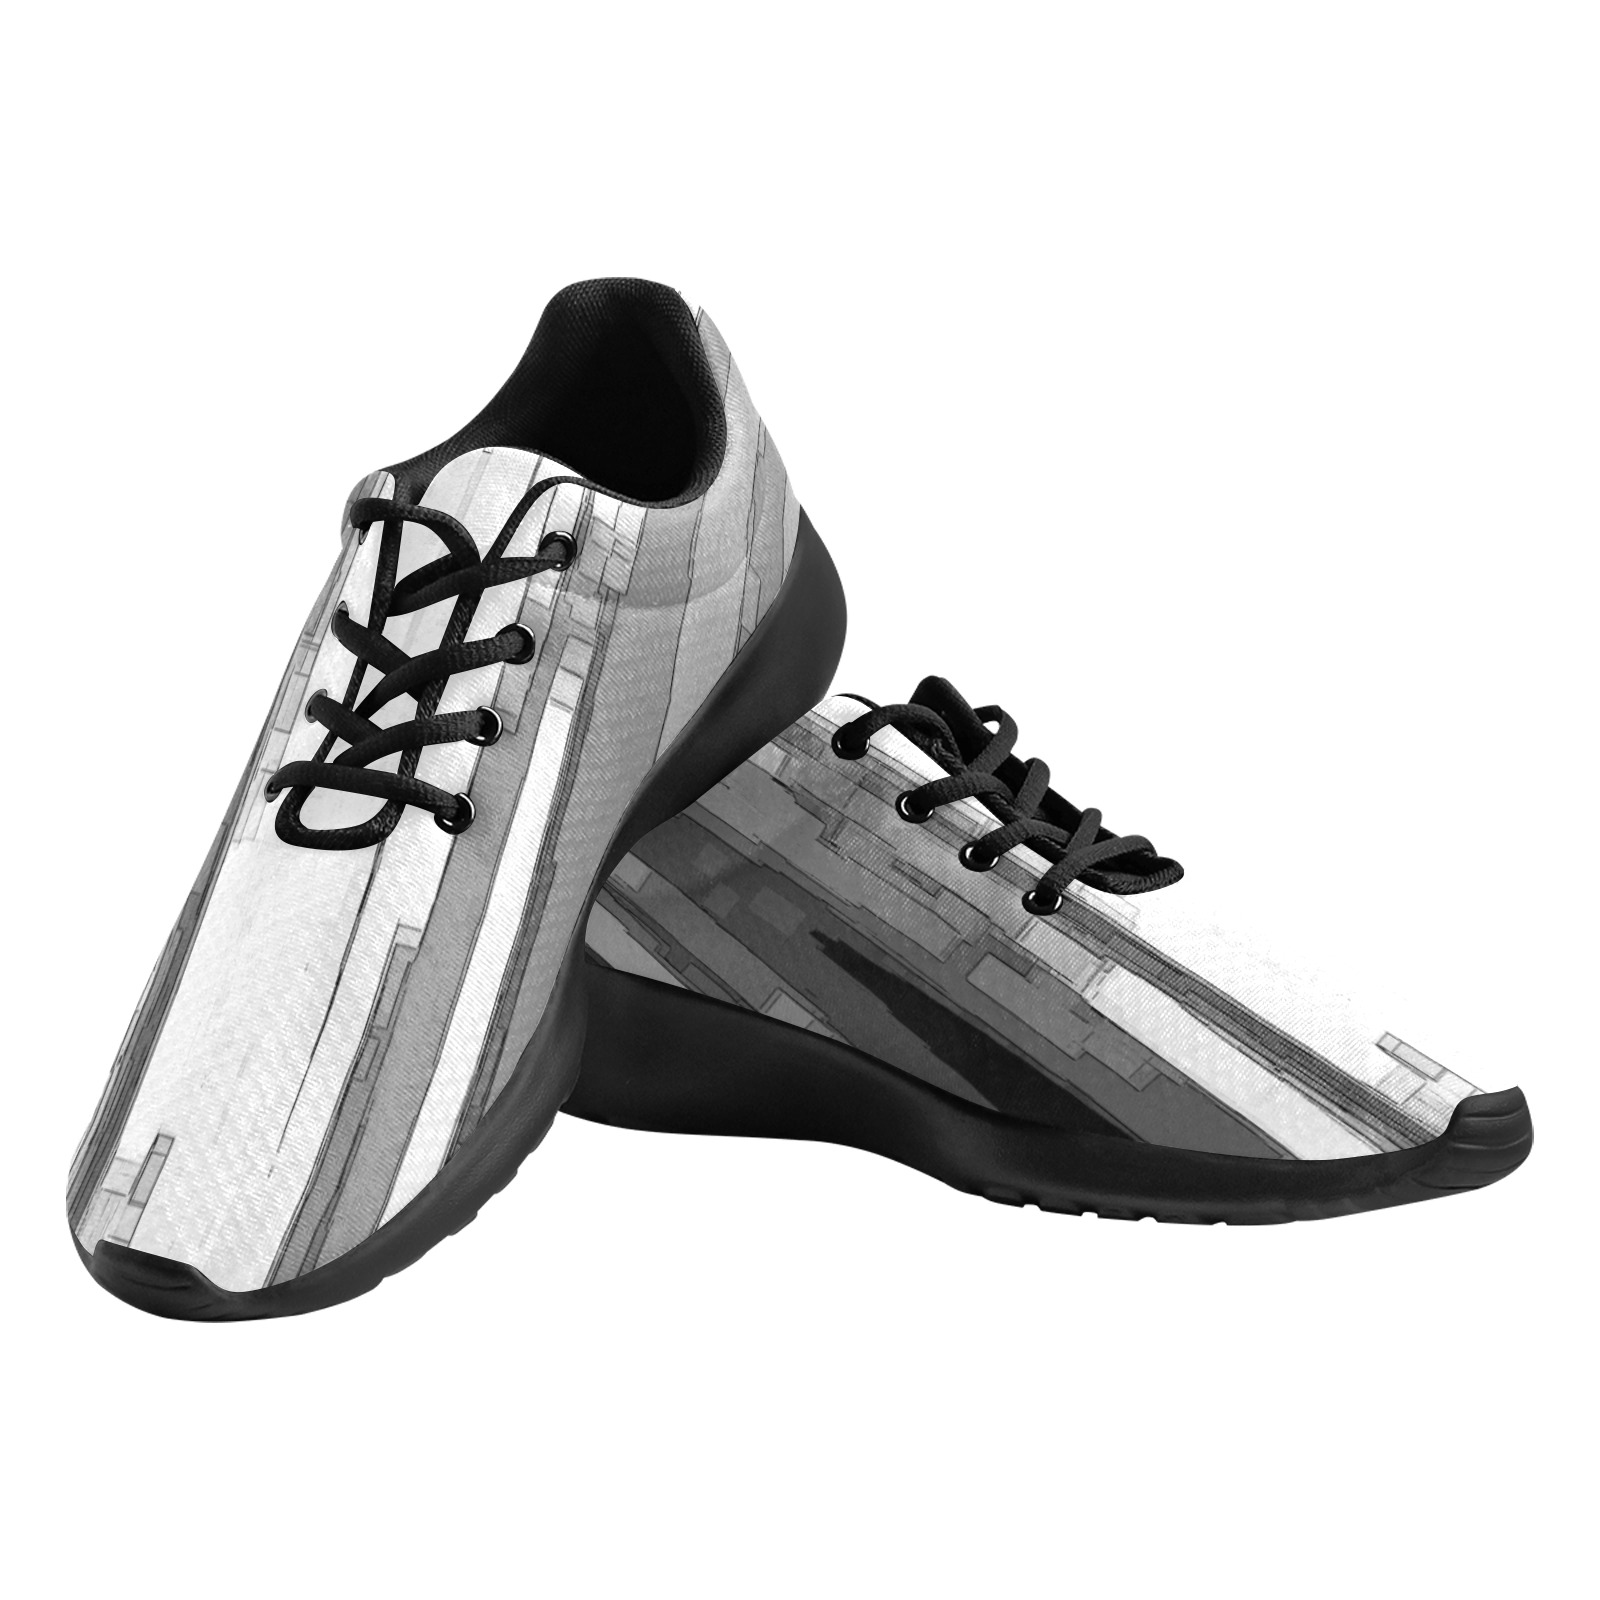 Greyscale Abstract B&W Art Women's Athletic Shoes (Model 0200)